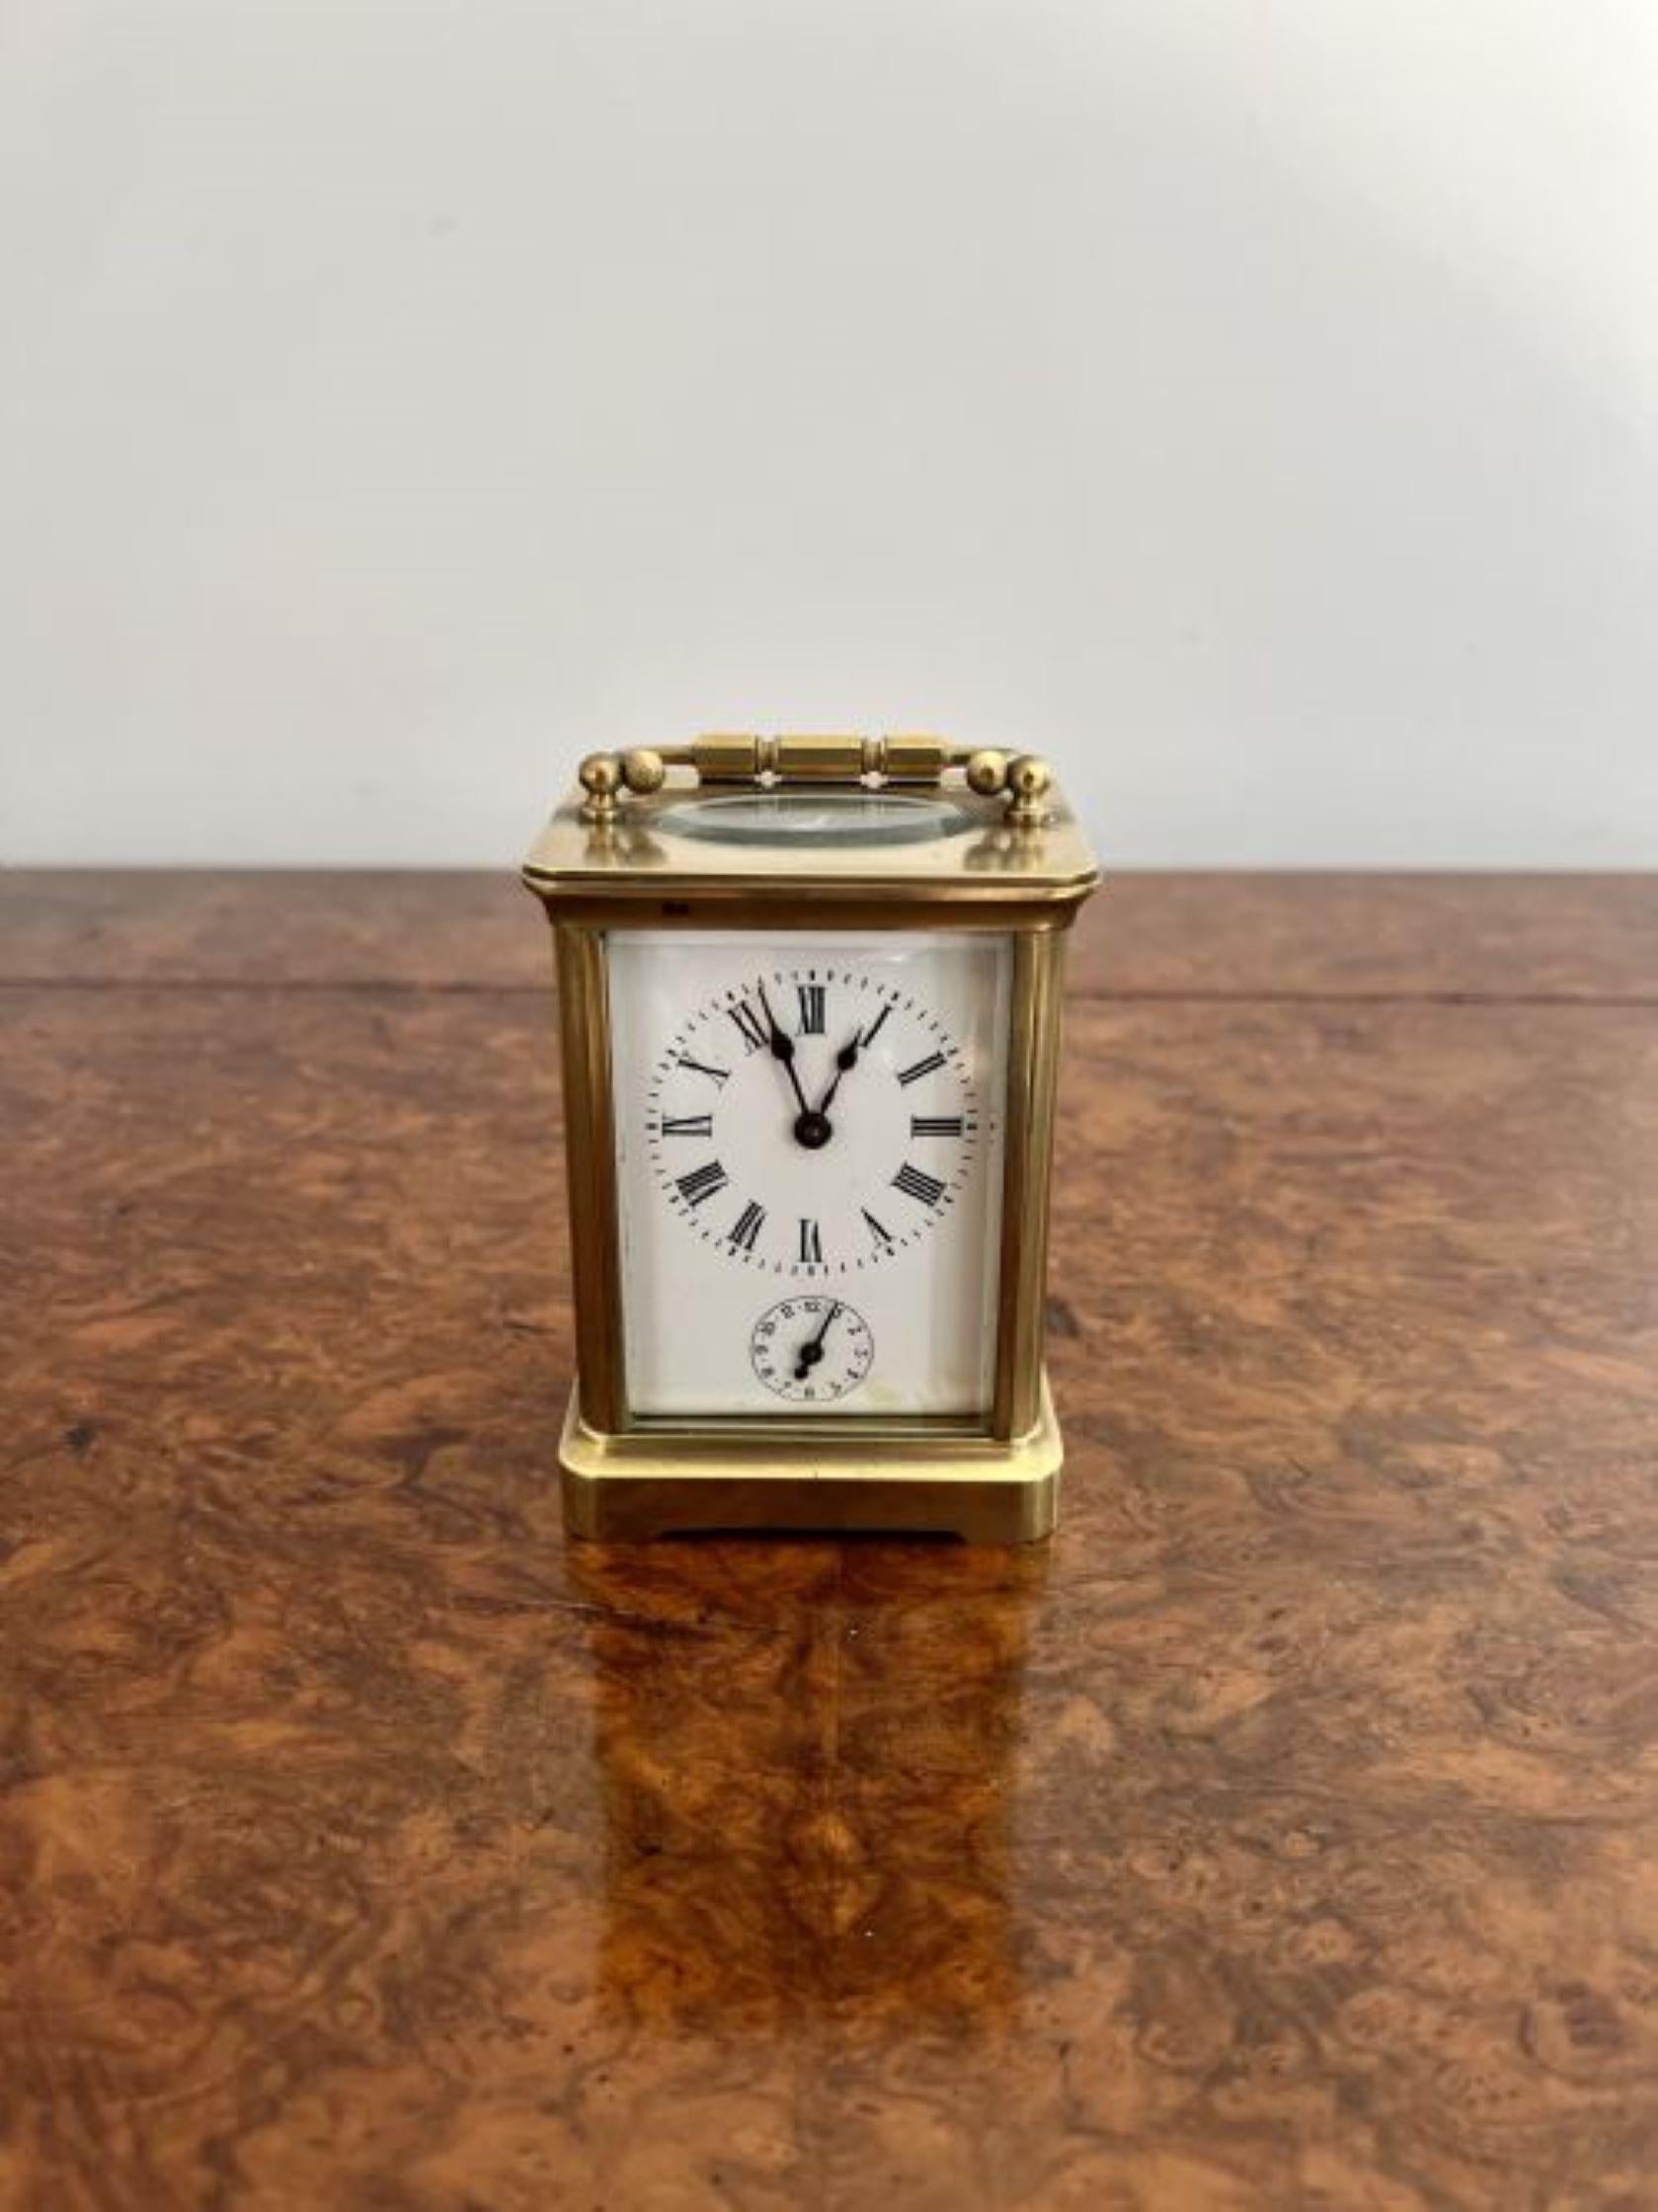 Antique Victorian quality brass carriage clock with an alarm having a quality antique Victorian brass carriage clock with an alarm clock with a French eight day movement with an alarm striking on a bell, a white dial with Roman numerals, the